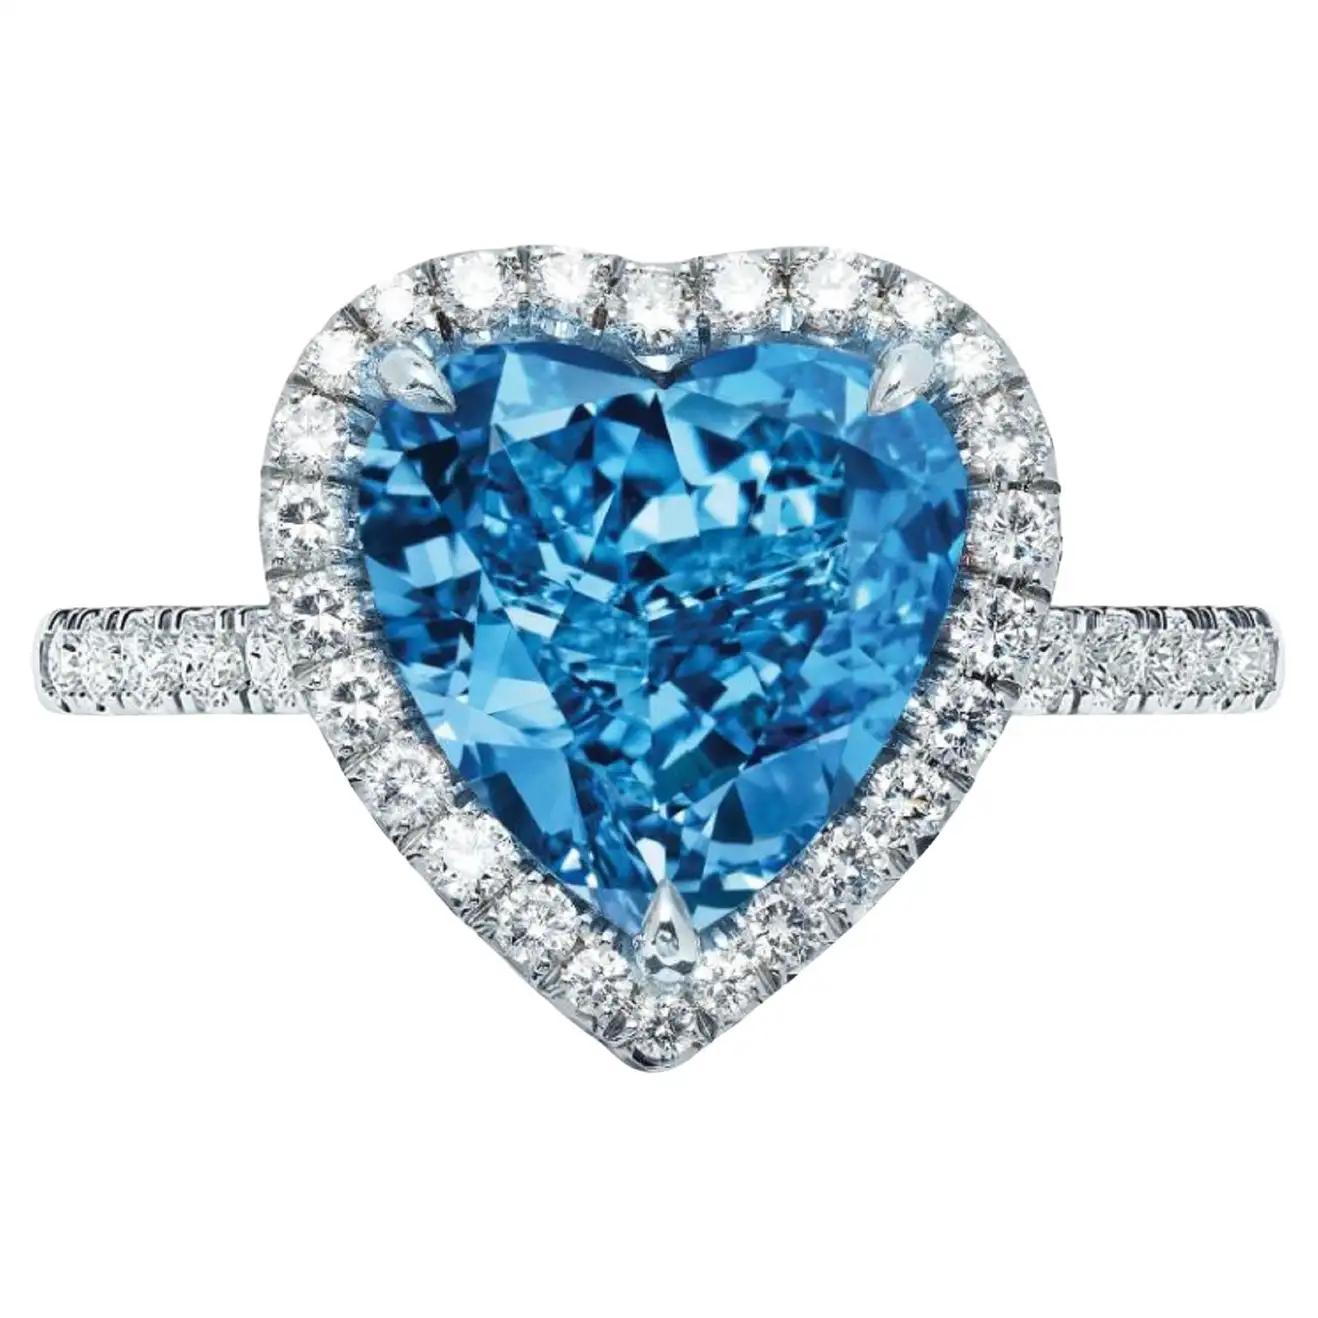 An exquisite diamond that is a very rare find a real fancy grey blue diamond 

This diamond will increase in value is an investment 